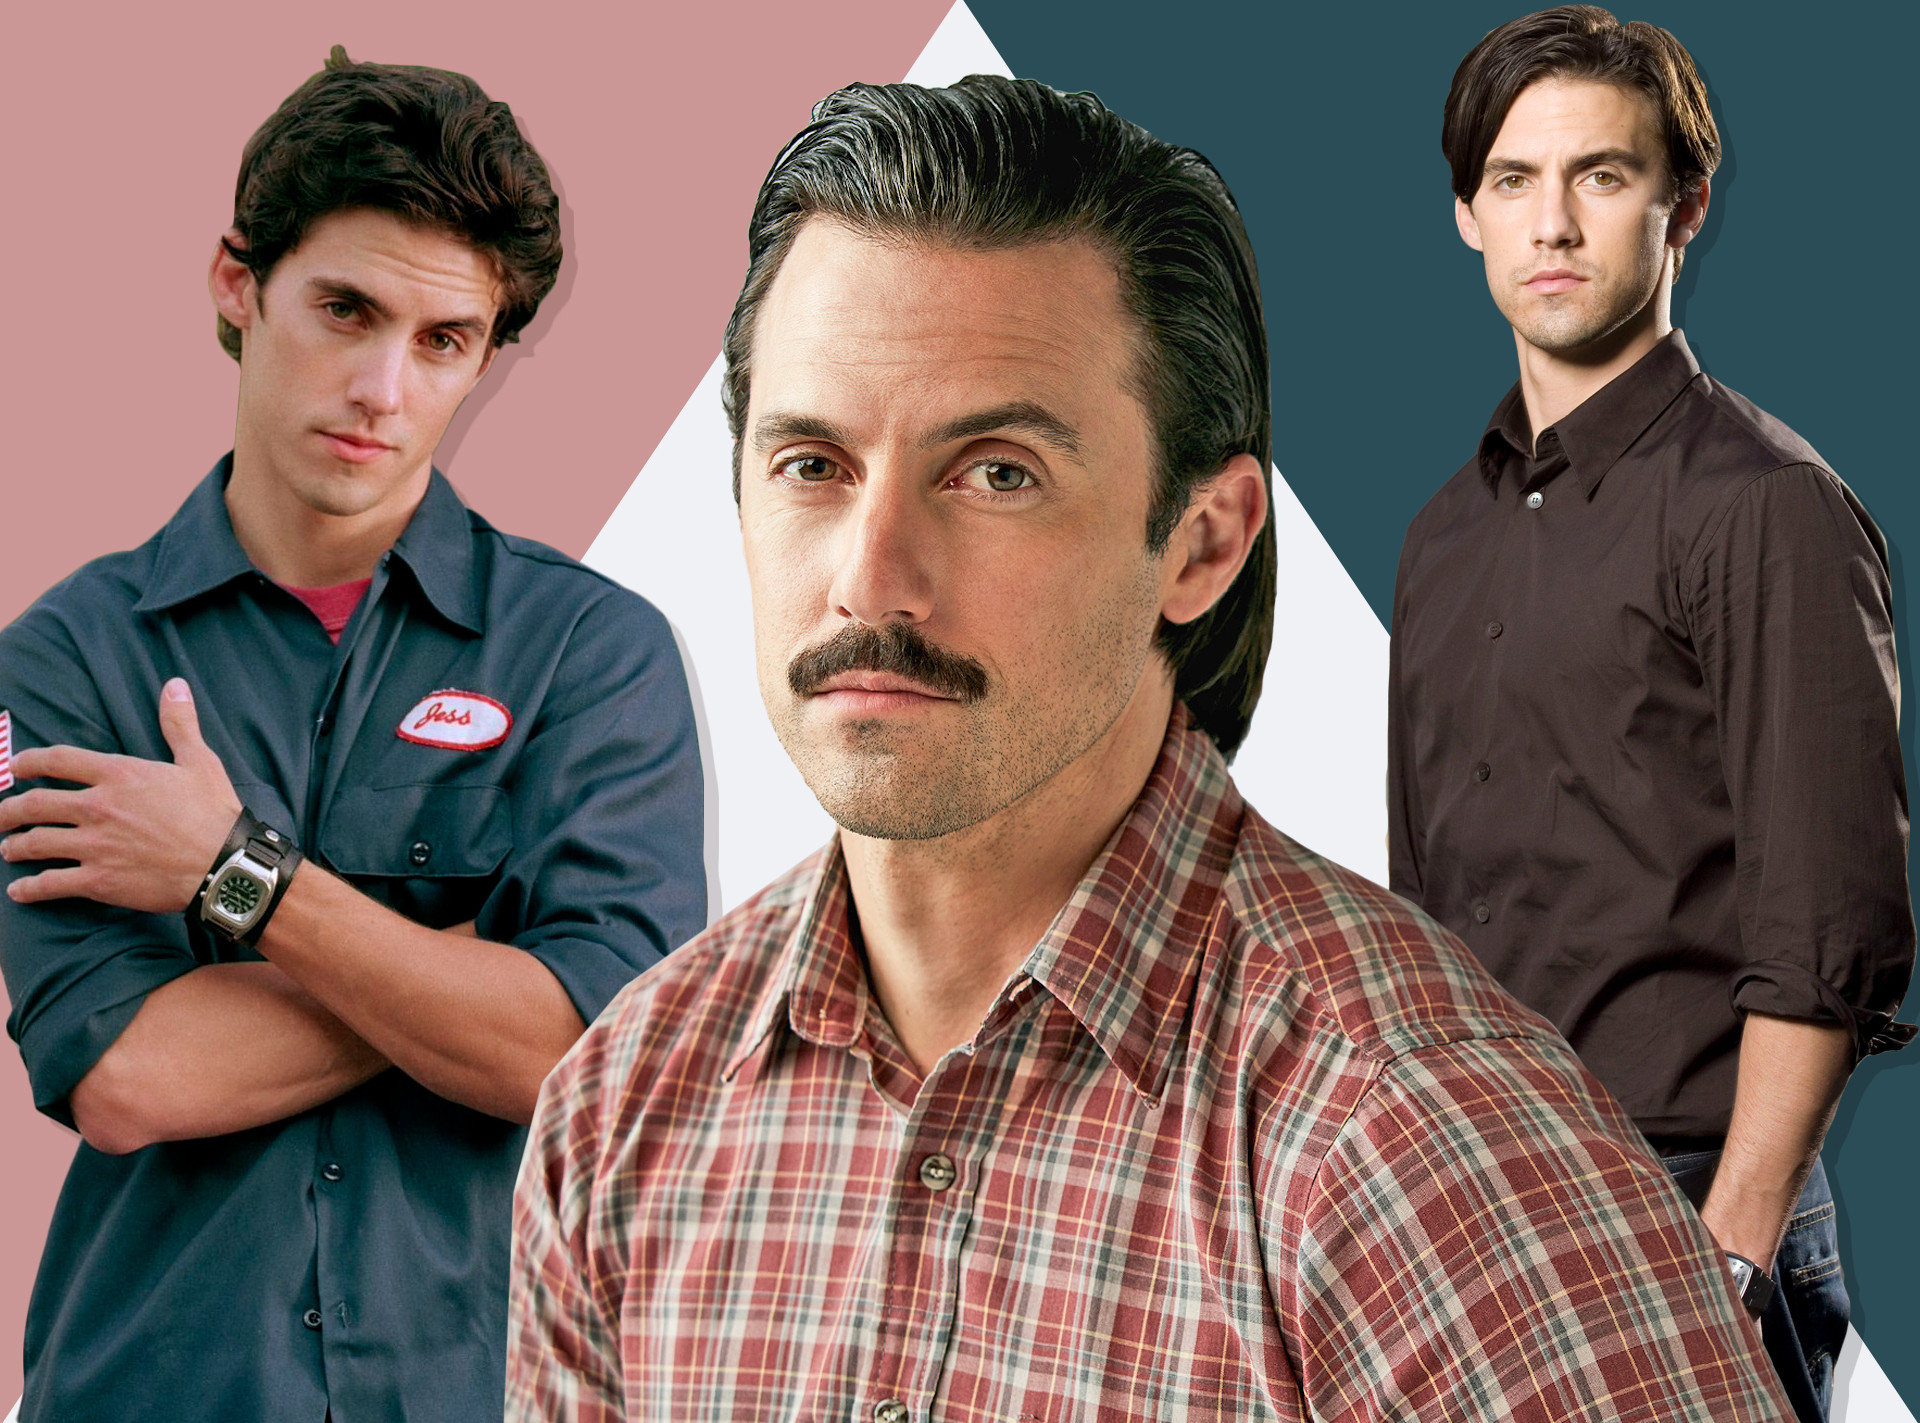 7. How to Style Your Hair Like Milo Ventimiglia - wide 4